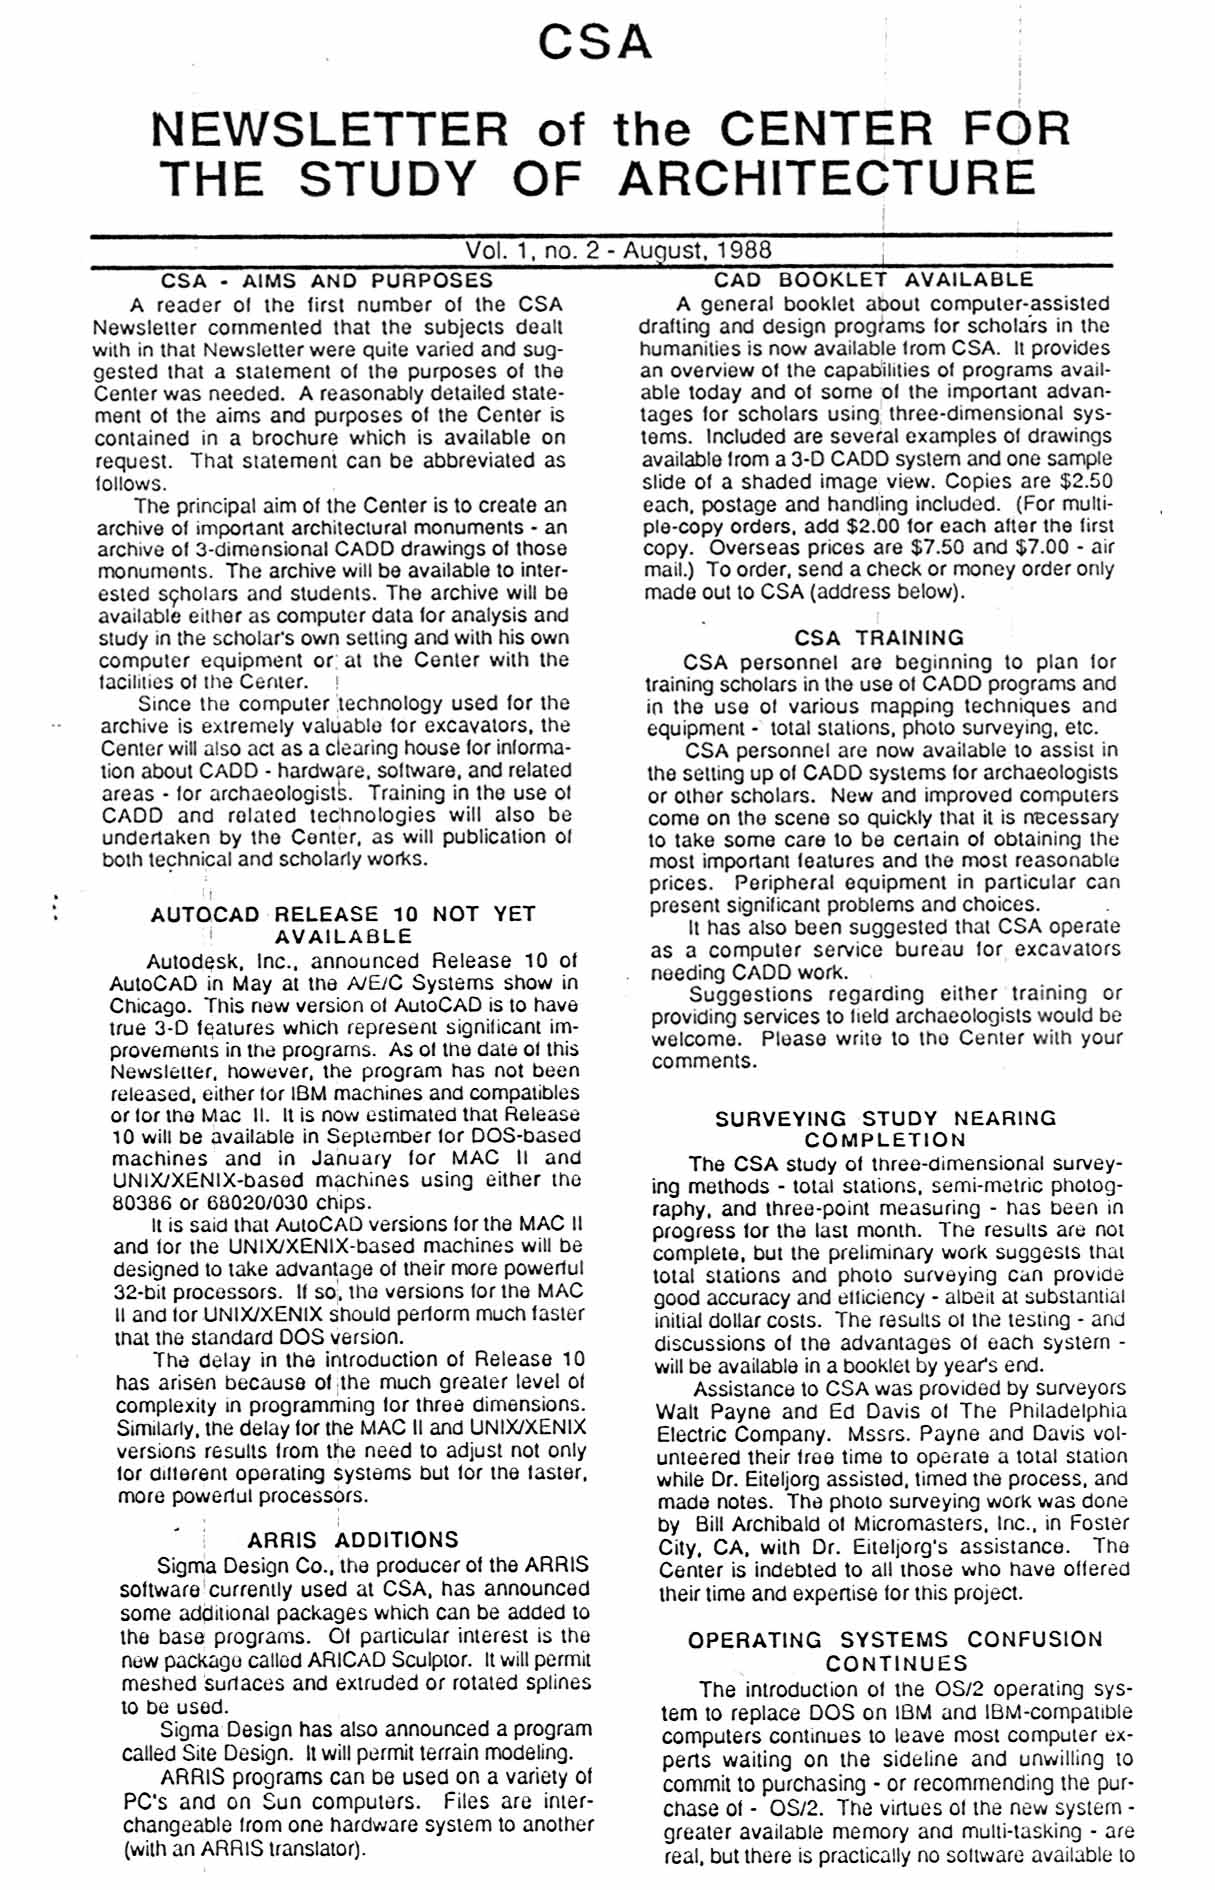 Scanned Image of Page 1, vol 1 no 2